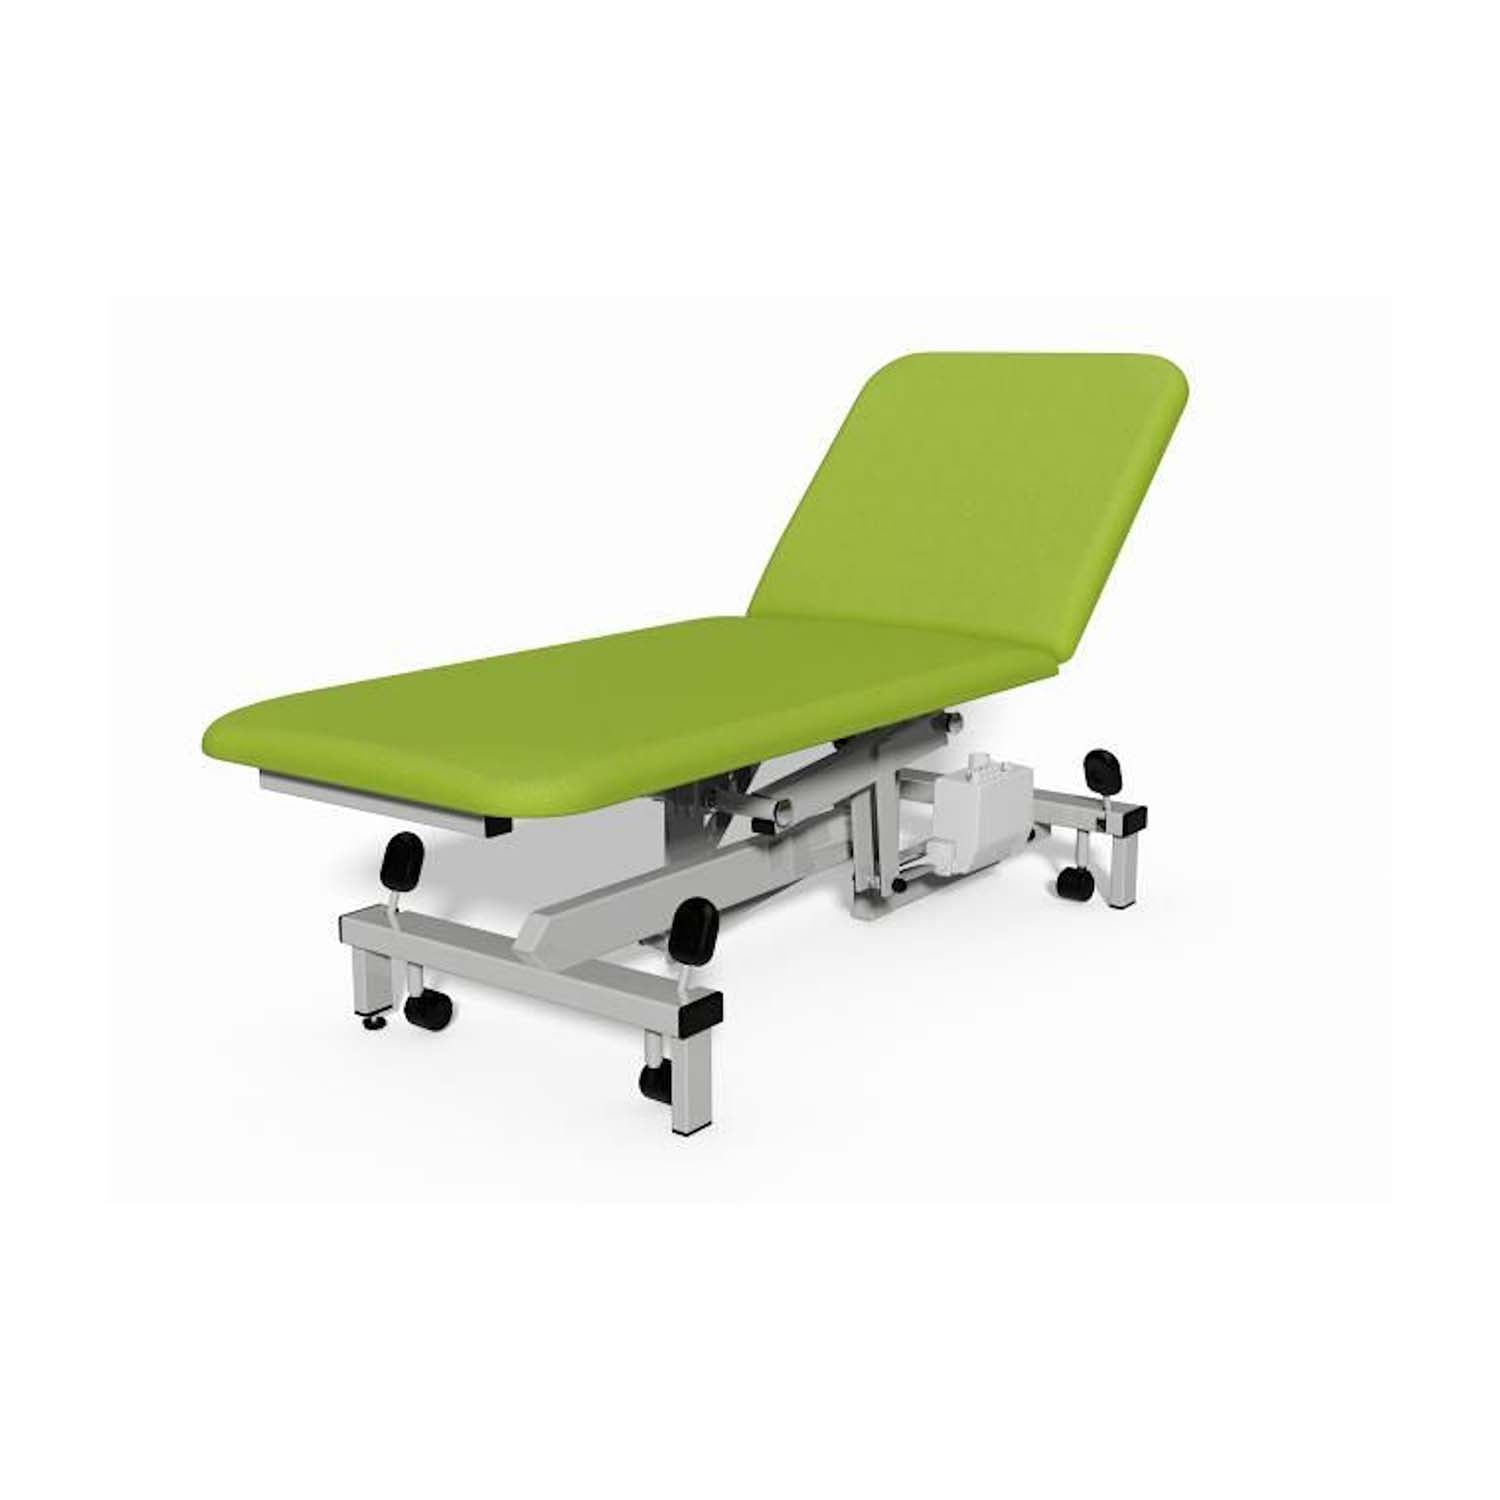 Plinth 2000 Model 502 Examination Couch | Electric | Citrus Green